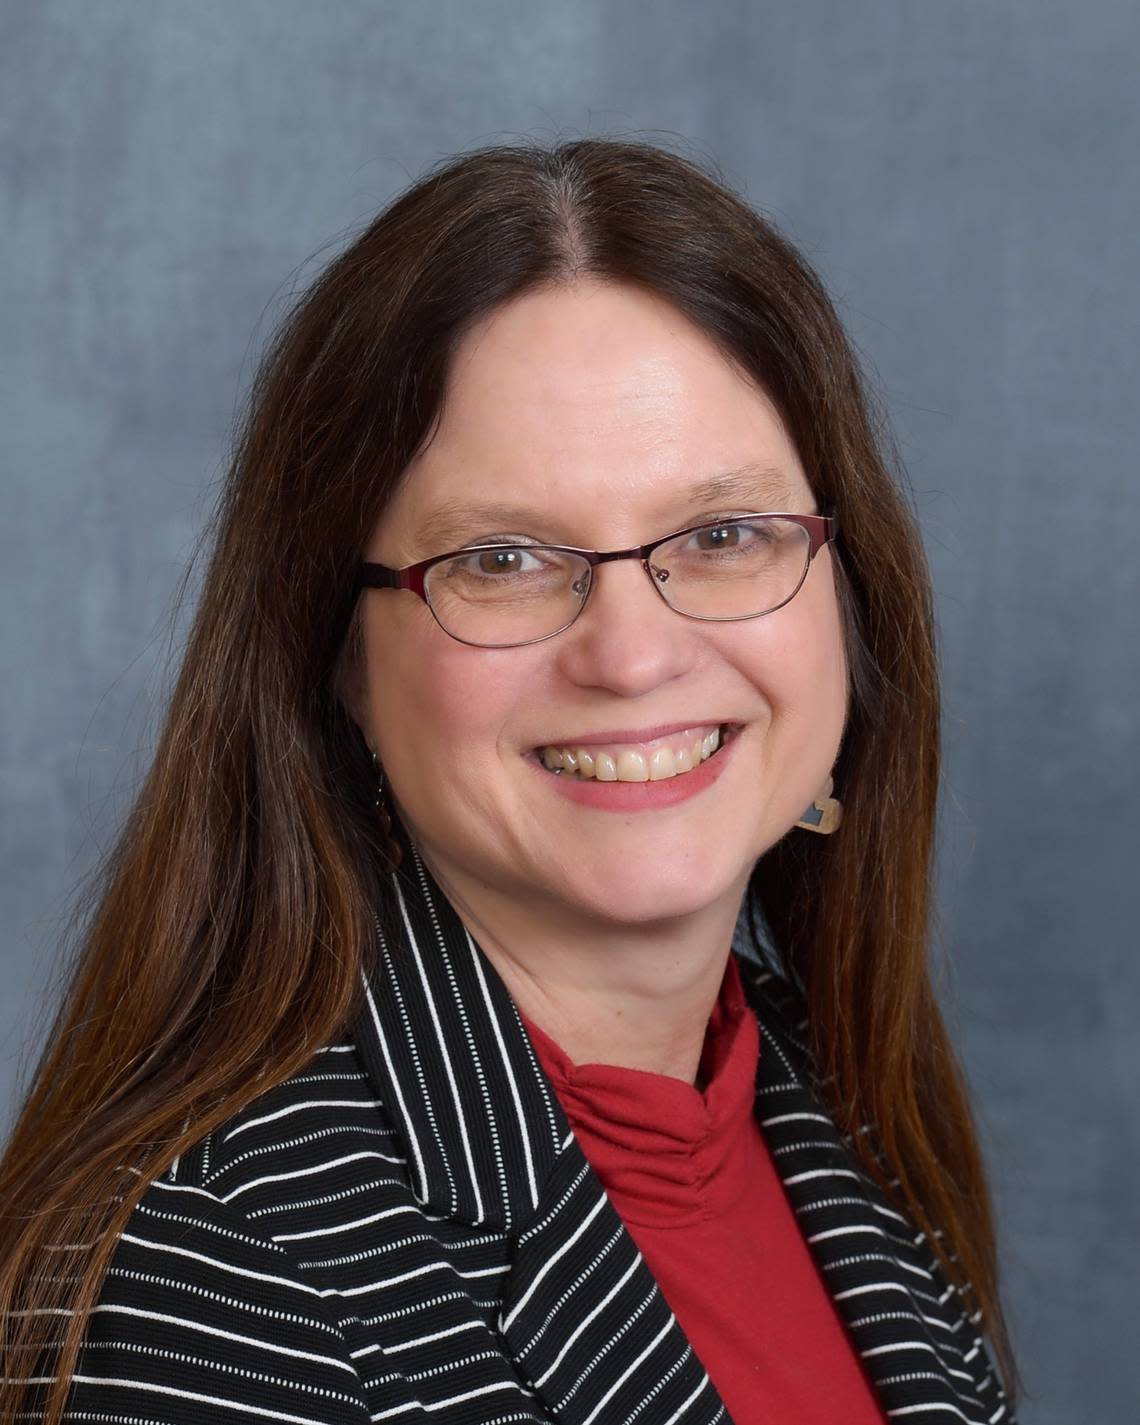 Dr. Anne Patrice Burgess is a family medicine physician who is serving as an Executive Medical Director for System Clinical Integration and Health Informatics at Saint Alphonsus Health System. 